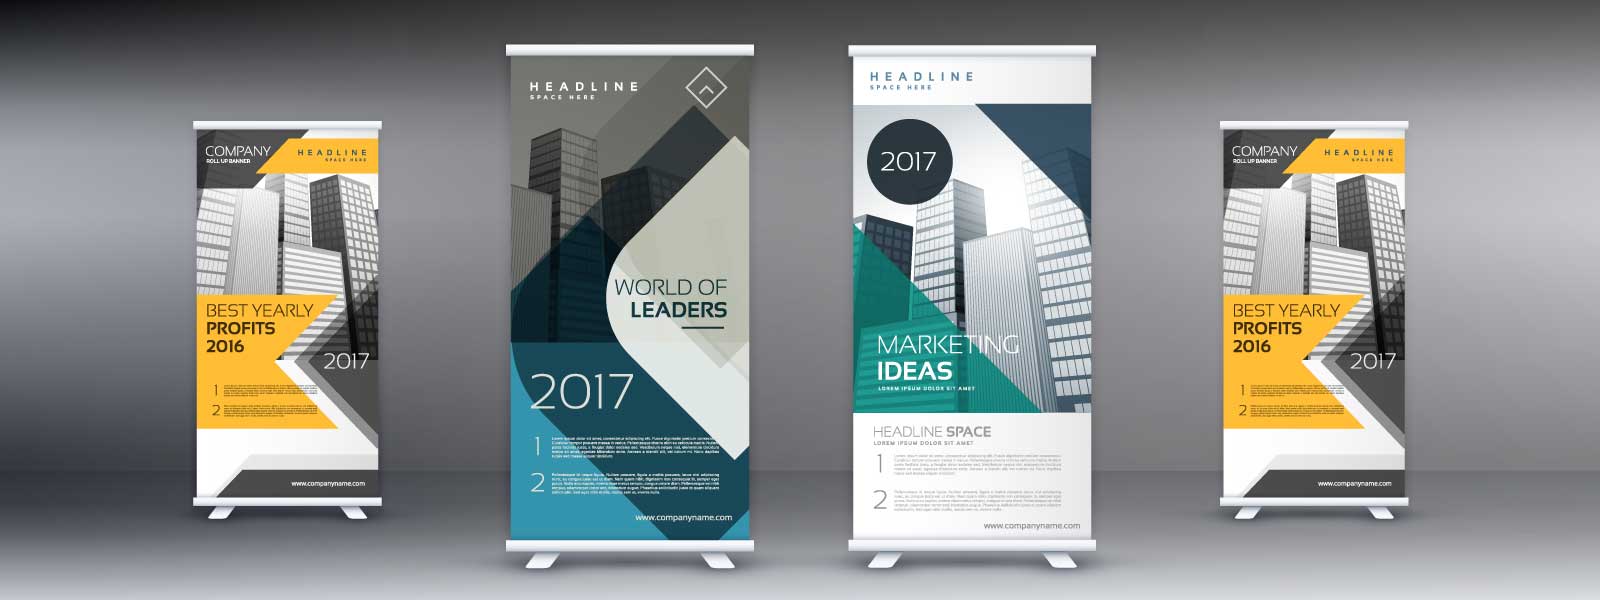 pull up banners cape town